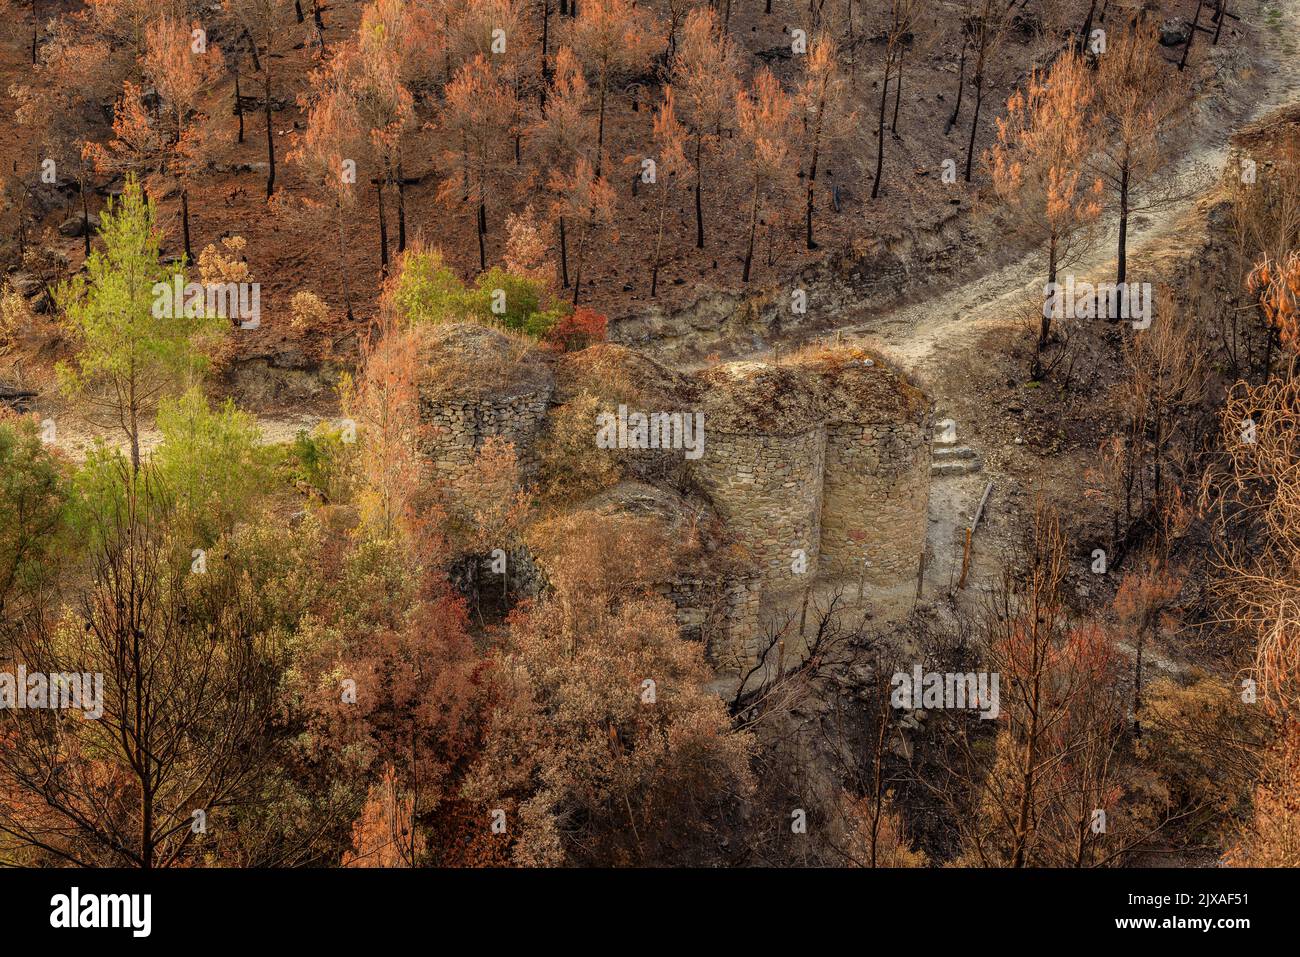 Tubs (Tines in catalan) and the Flequer valley after the 2022 Pont de Vilomara fire in the Sant Llorenç del Munt i l'Obac Natural Park Catalonia Spain Stock Photo